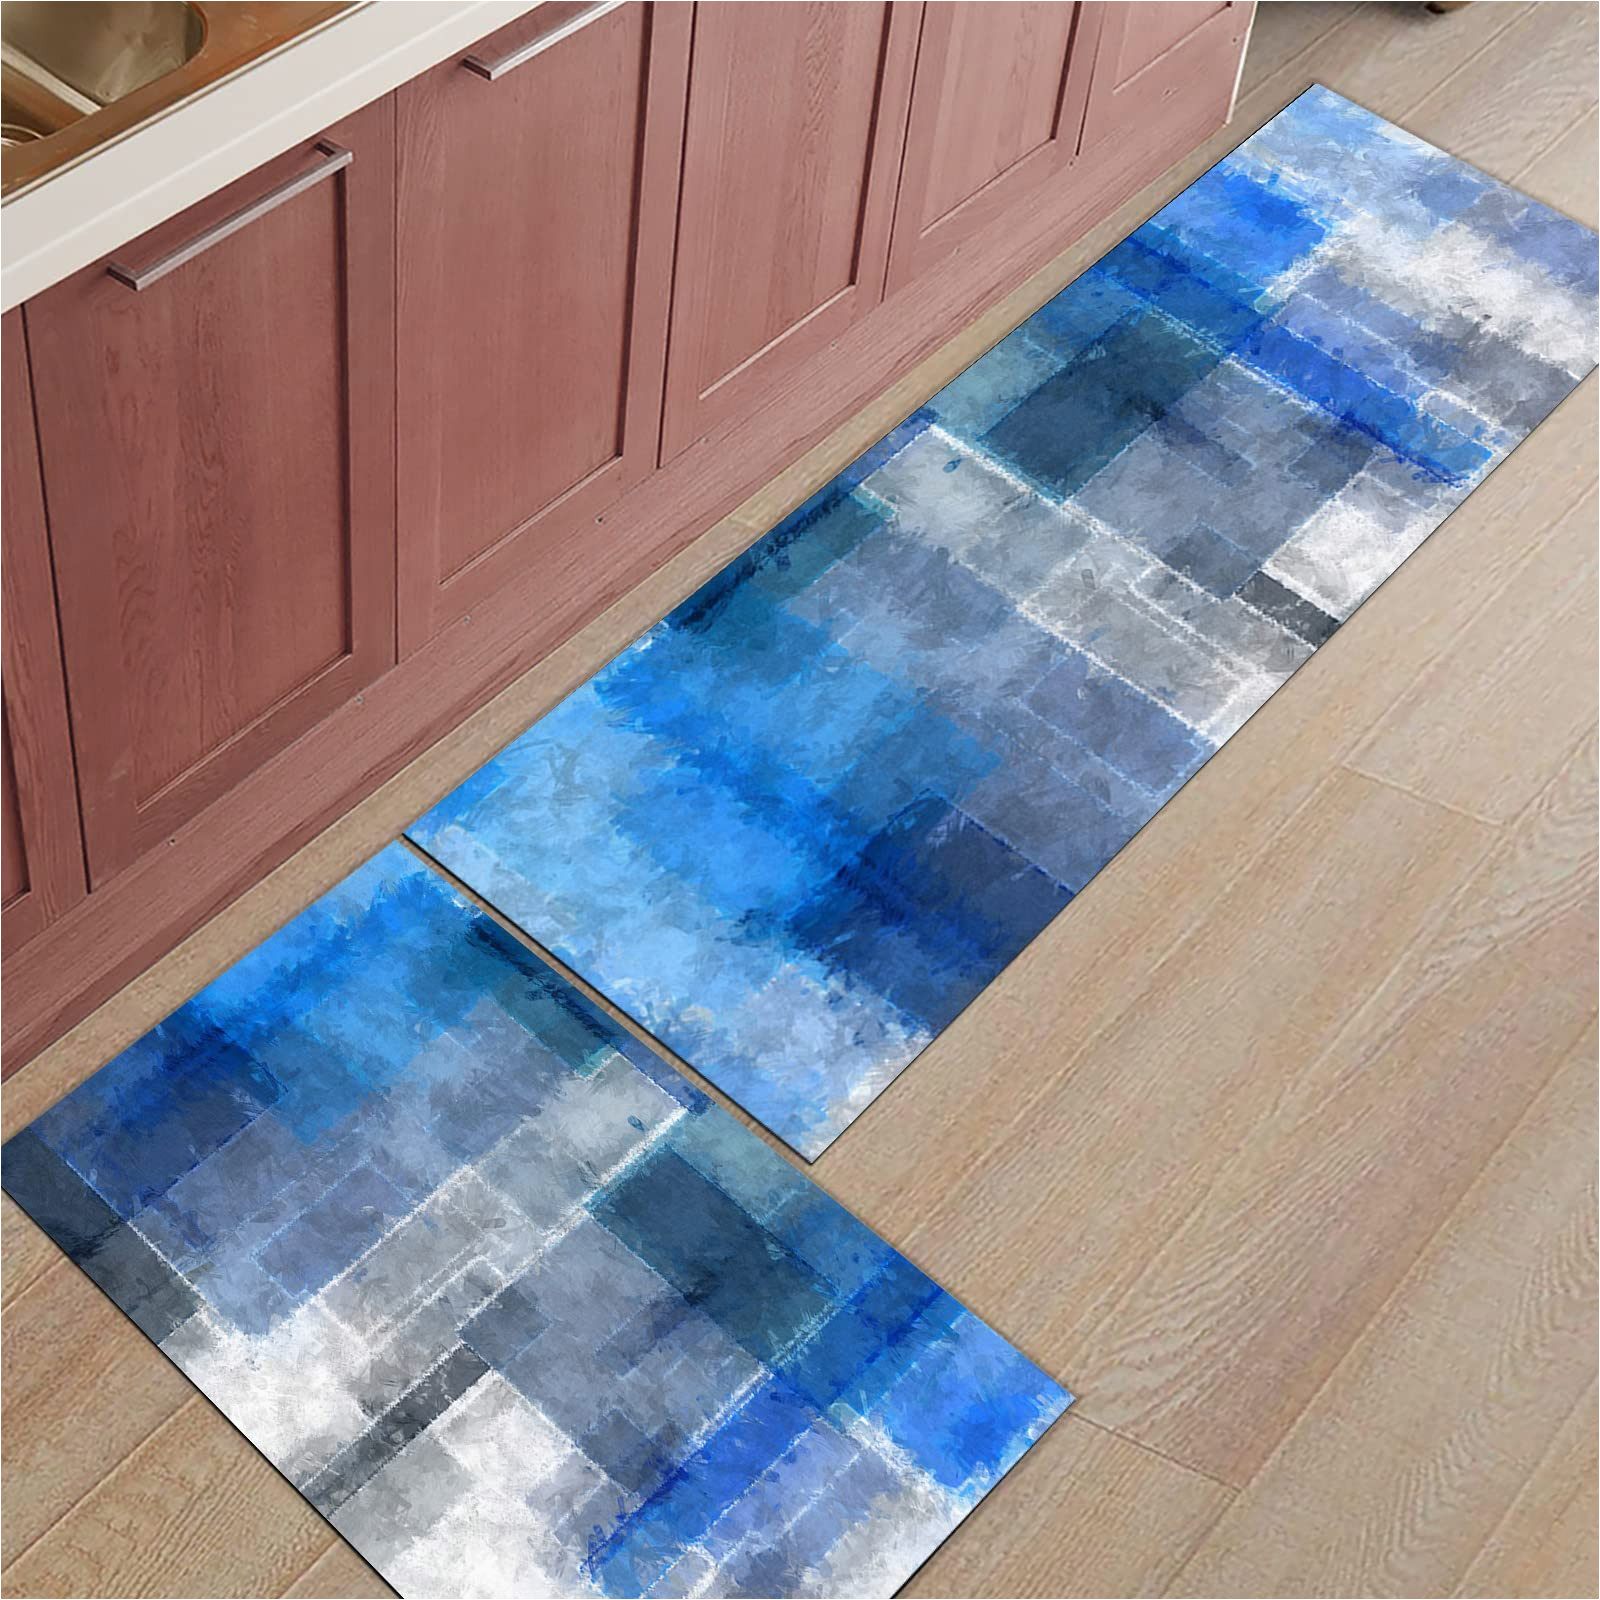 Blue and Gray Kitchen Rugs Blue and Gray Kitchen Rugs Set Of 2 Kitchen Mats Washable Non-slip Kitchen Runner Rug for Floor, Living Room, Laundry, Bedroom, Sink, Front Door, …